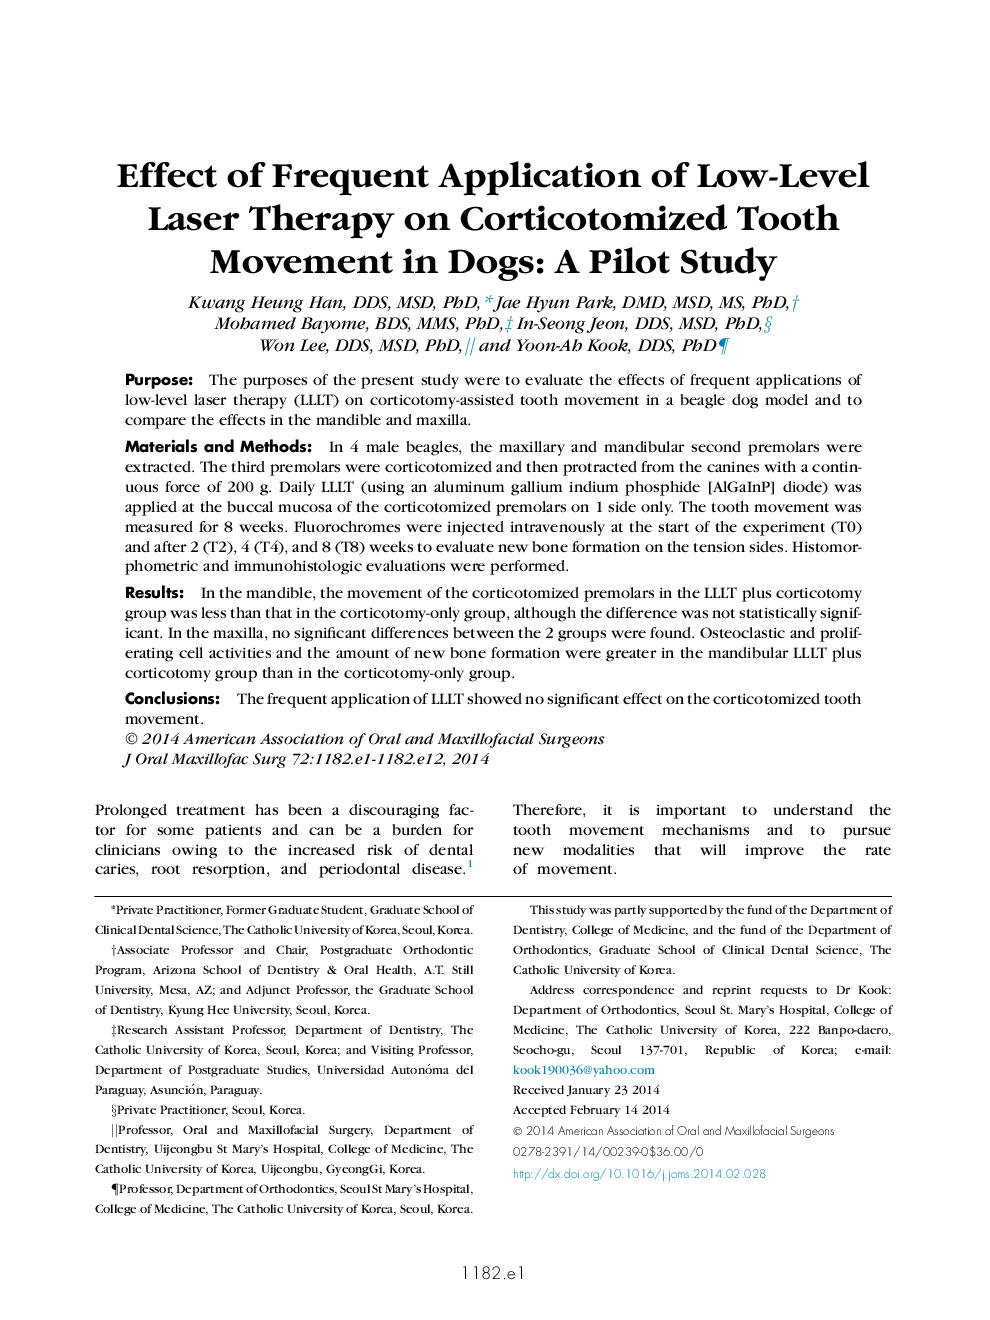 Effect of Frequent Application of Low-Level Laser Therapy on Corticotomized Tooth Movement in Dogs: A Pilot Study